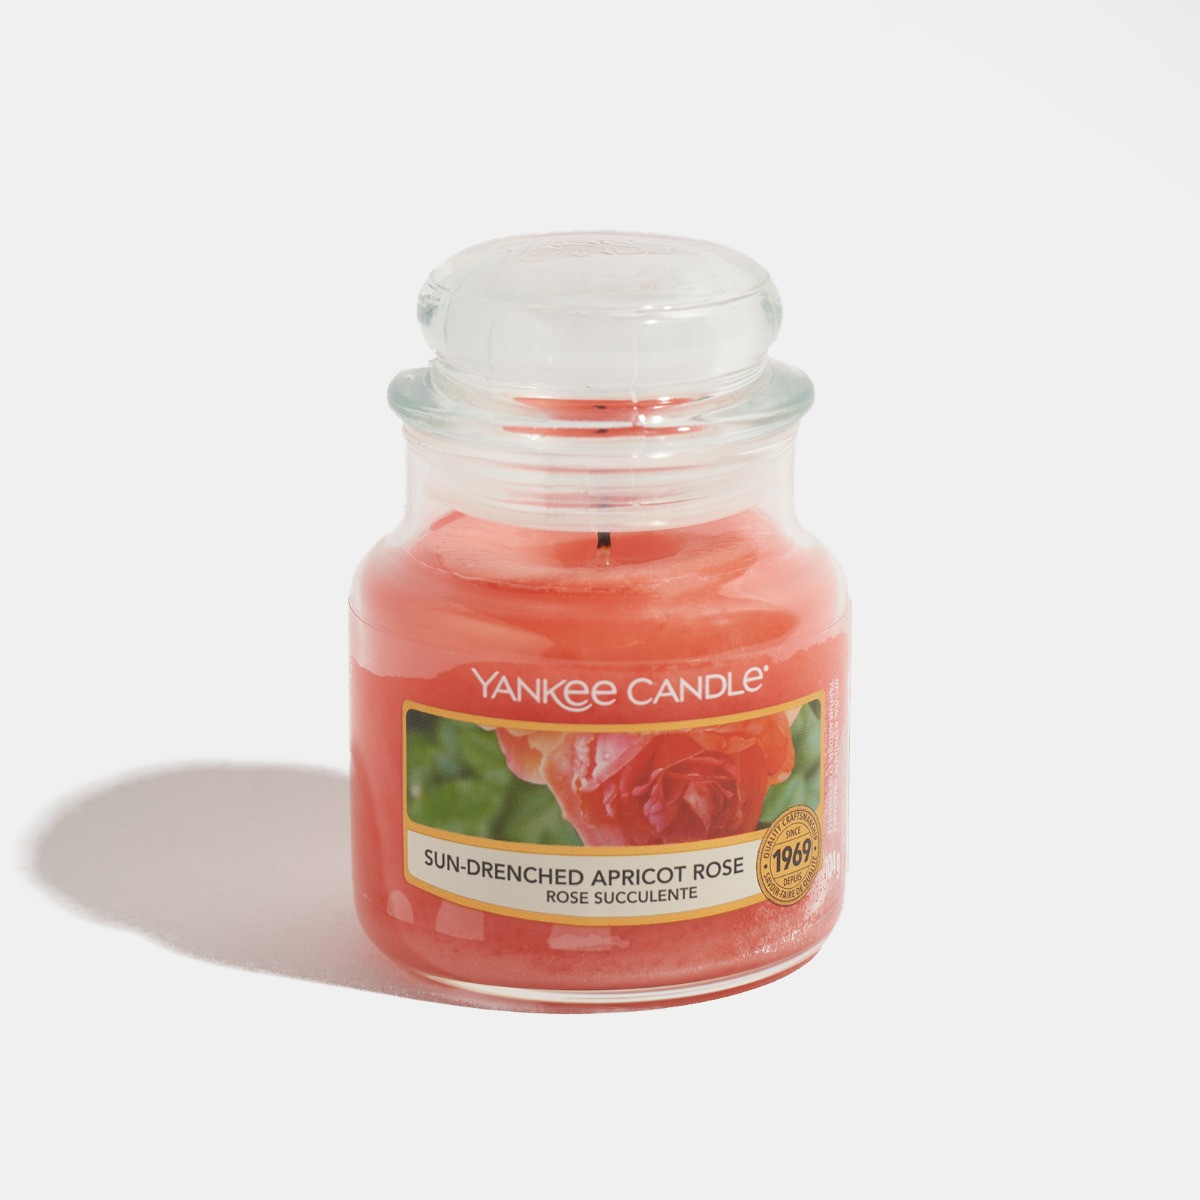 Yankee Candle Small Jar - Sun-Drenched Apricot Rose>